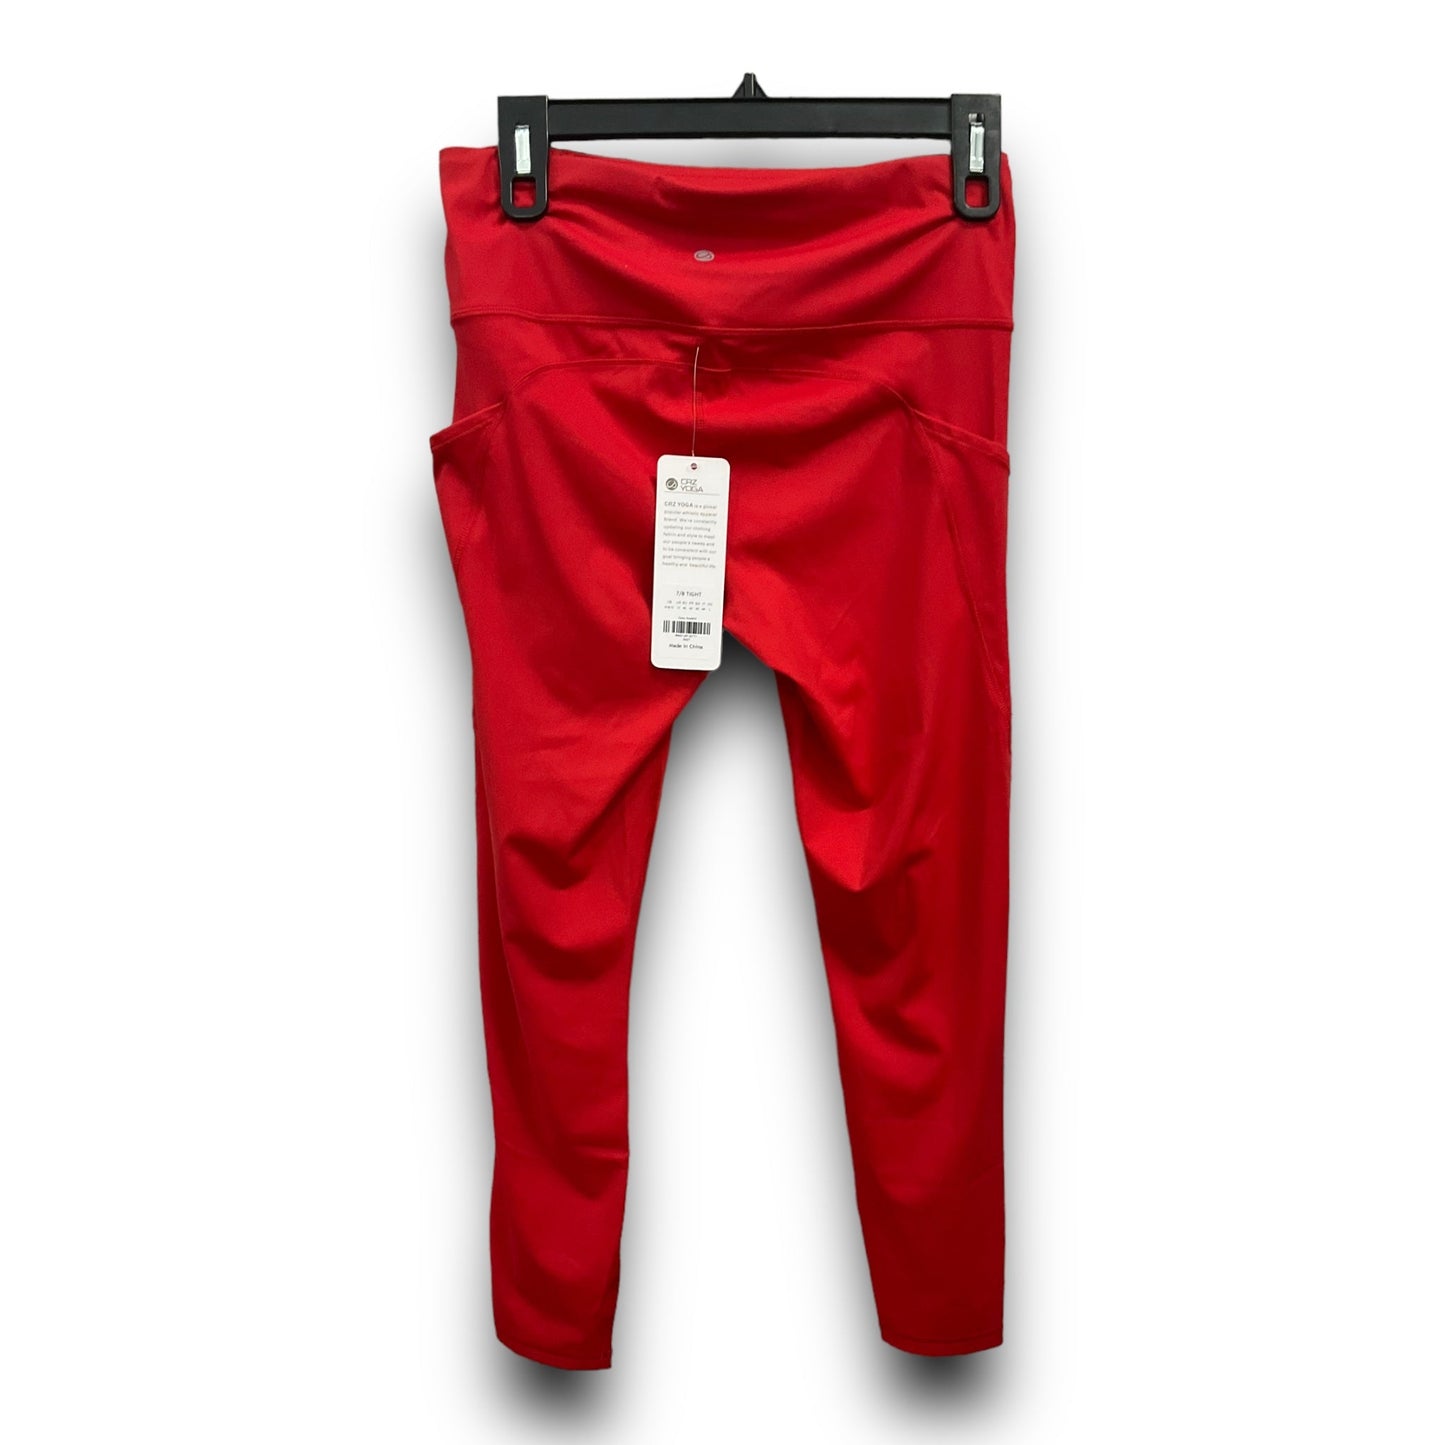 Red Athletic Leggings Cmc, Size M